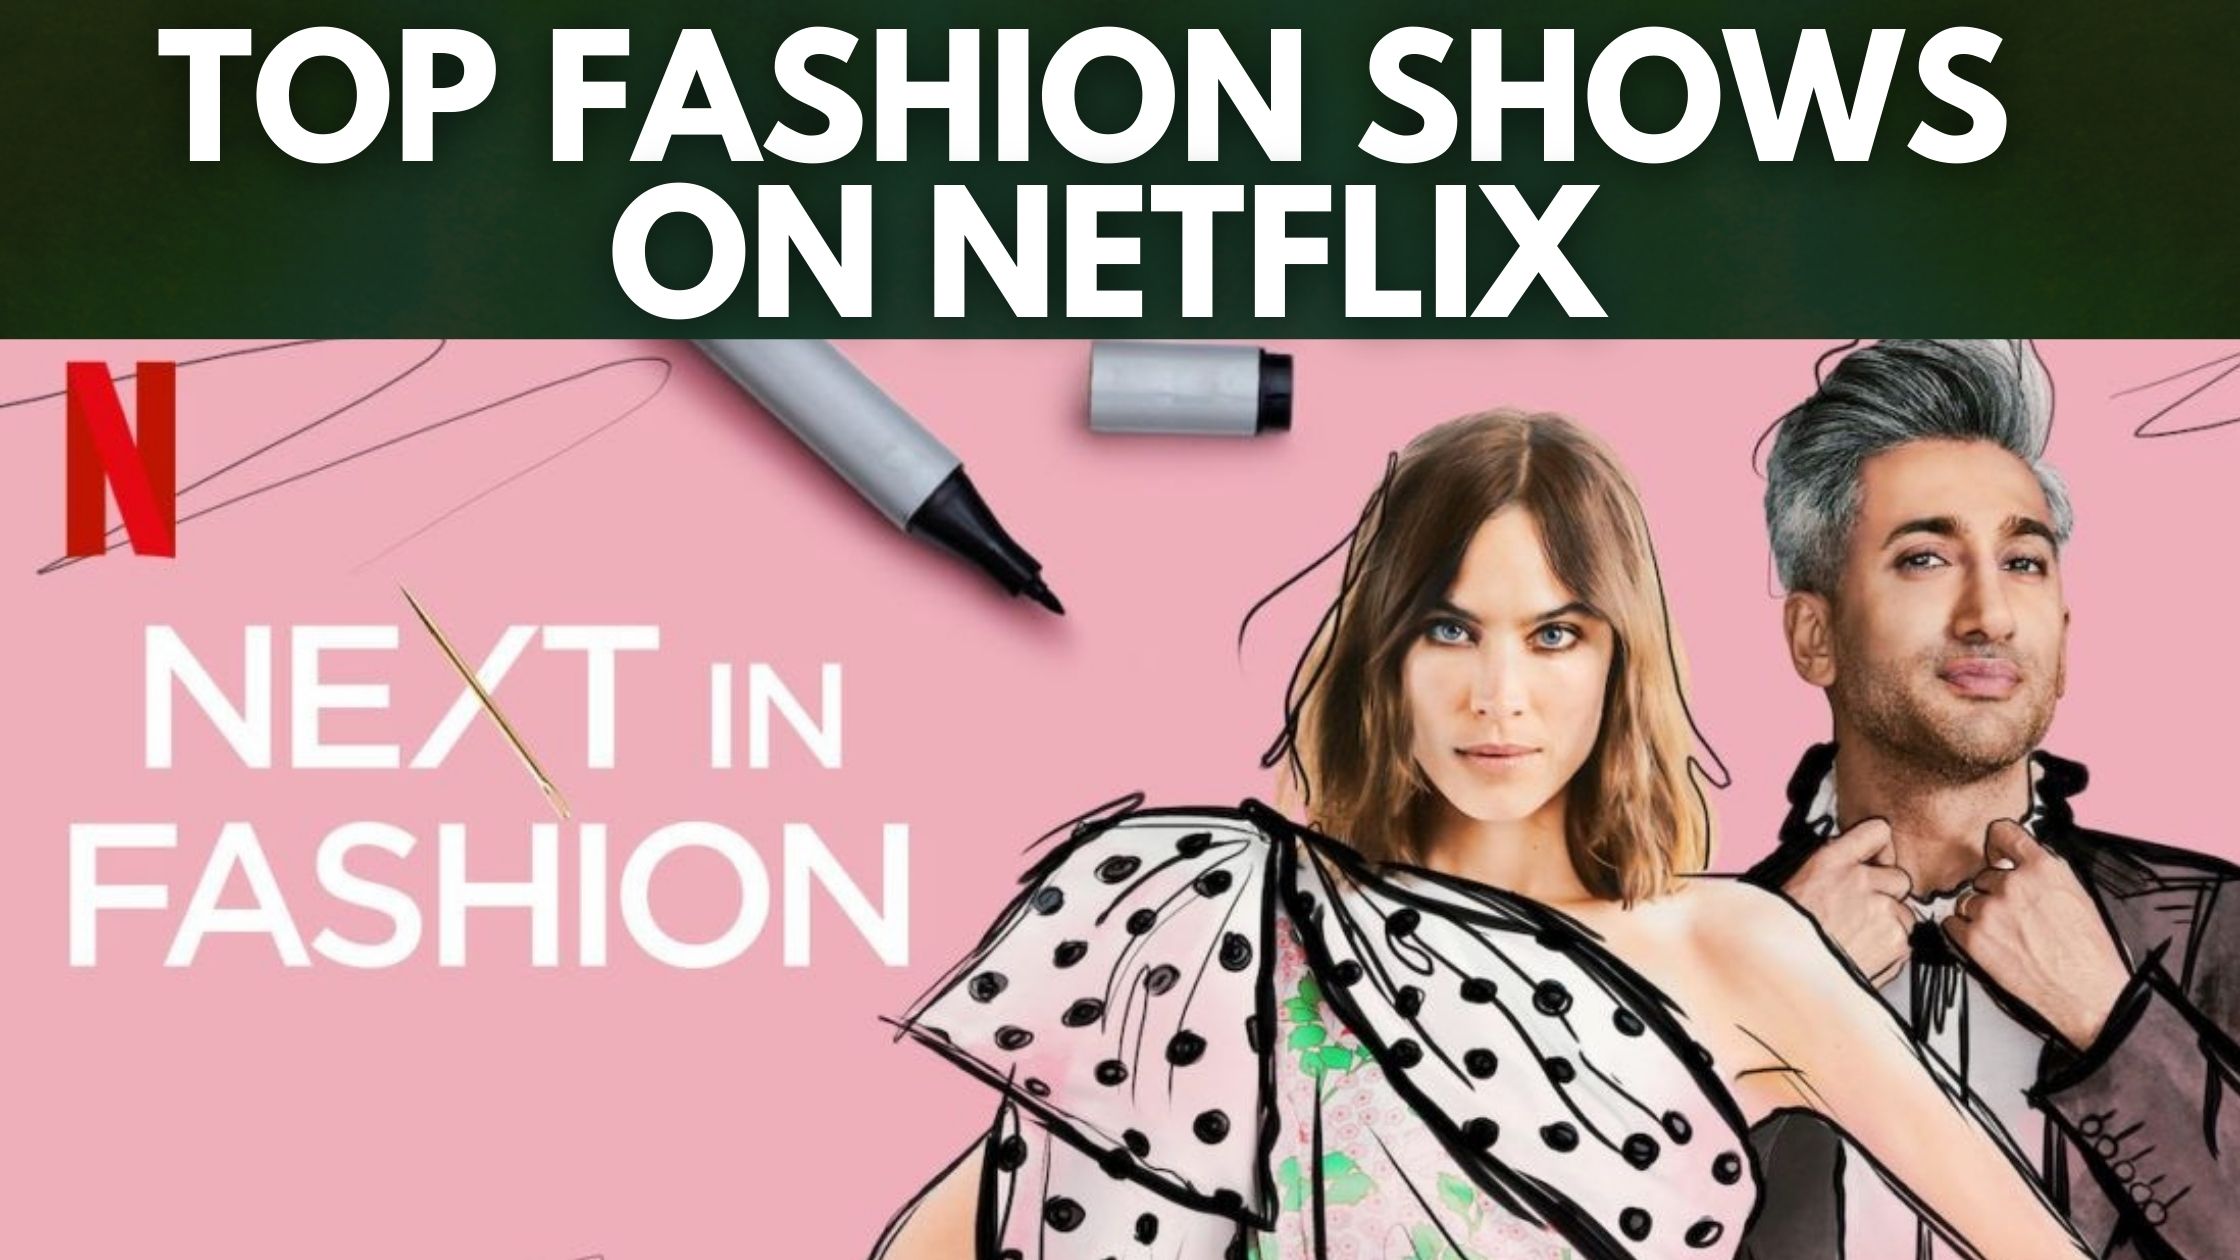 Top 5 Fashion Shows on Netflix in 2022